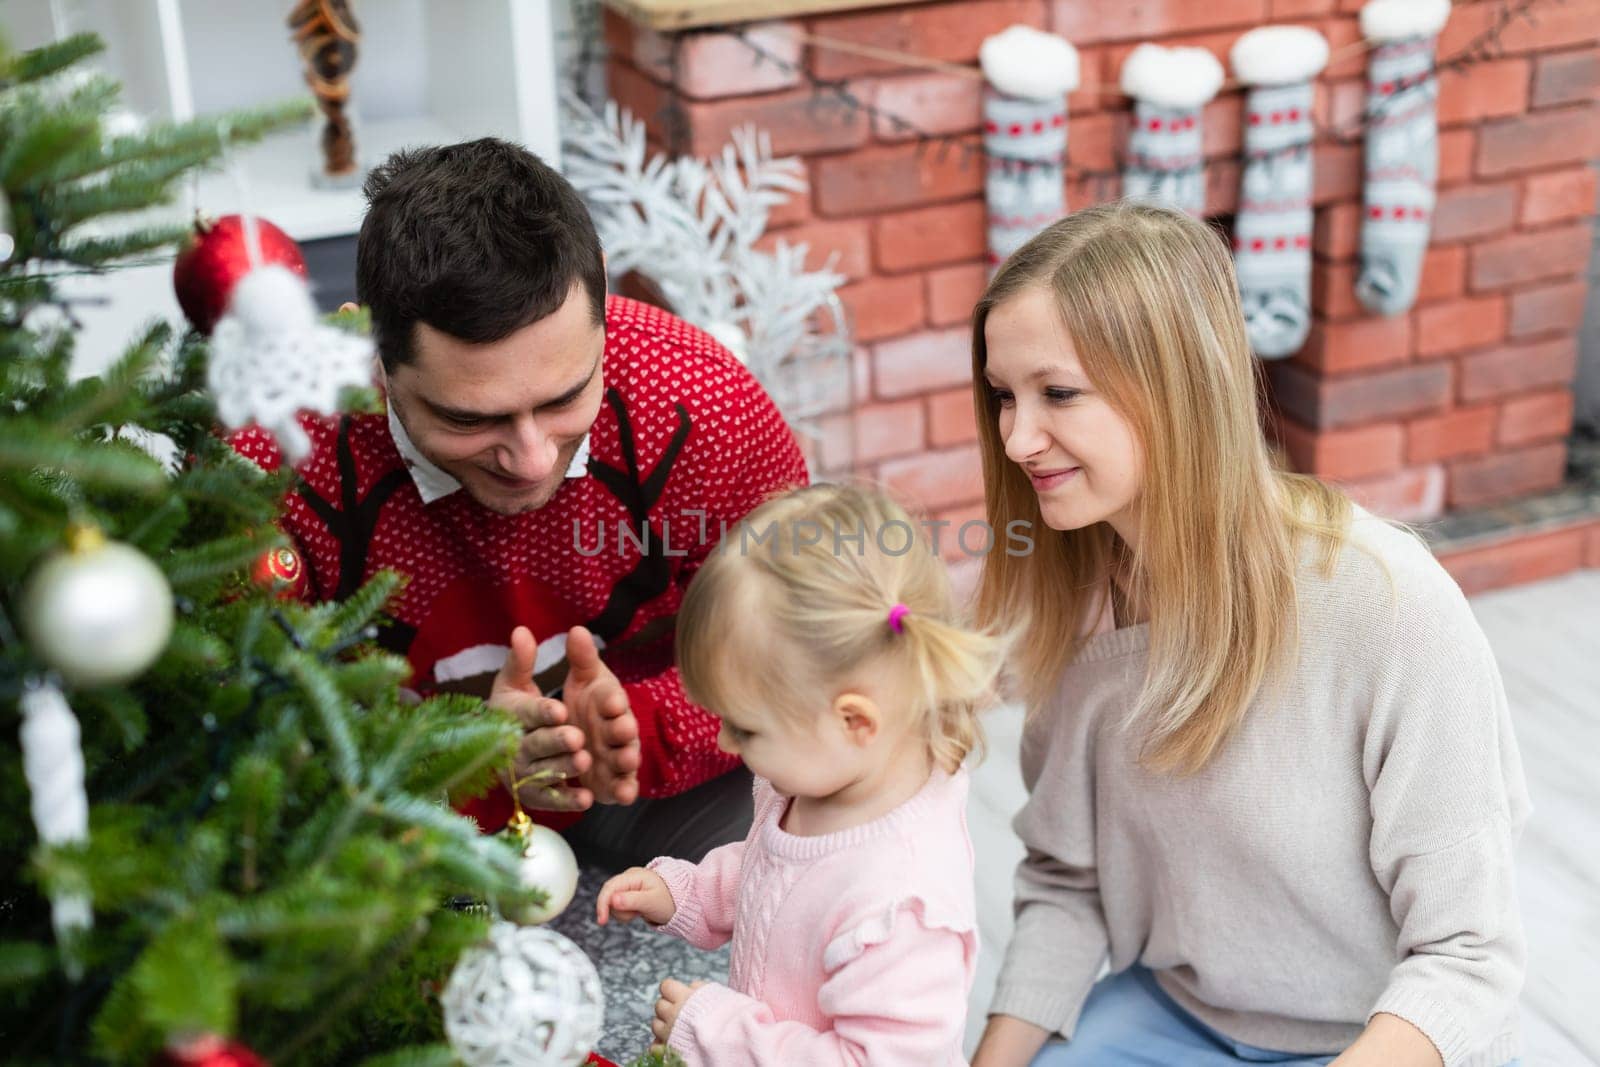 A woman, a man and a little girl are staying by the Christmas tree. The little girl is standing and her parents are crouching next to her. A man in a red sweater claps his hands. The family is smiling.